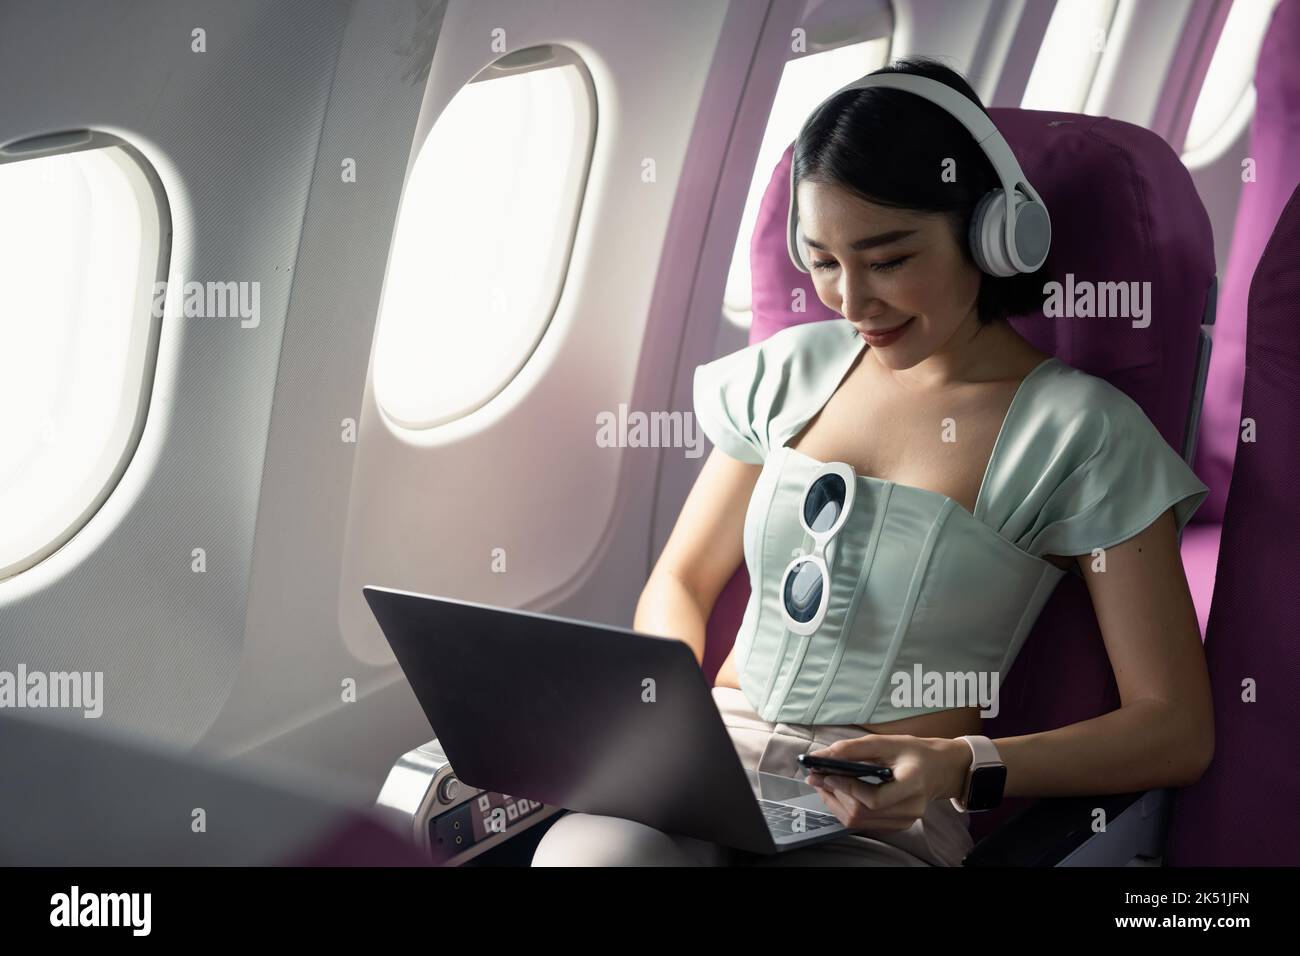 Plane passenger asian business woman working in airplane cabin during flight with laptop computer wifi listening to music with headphones Stock Photo